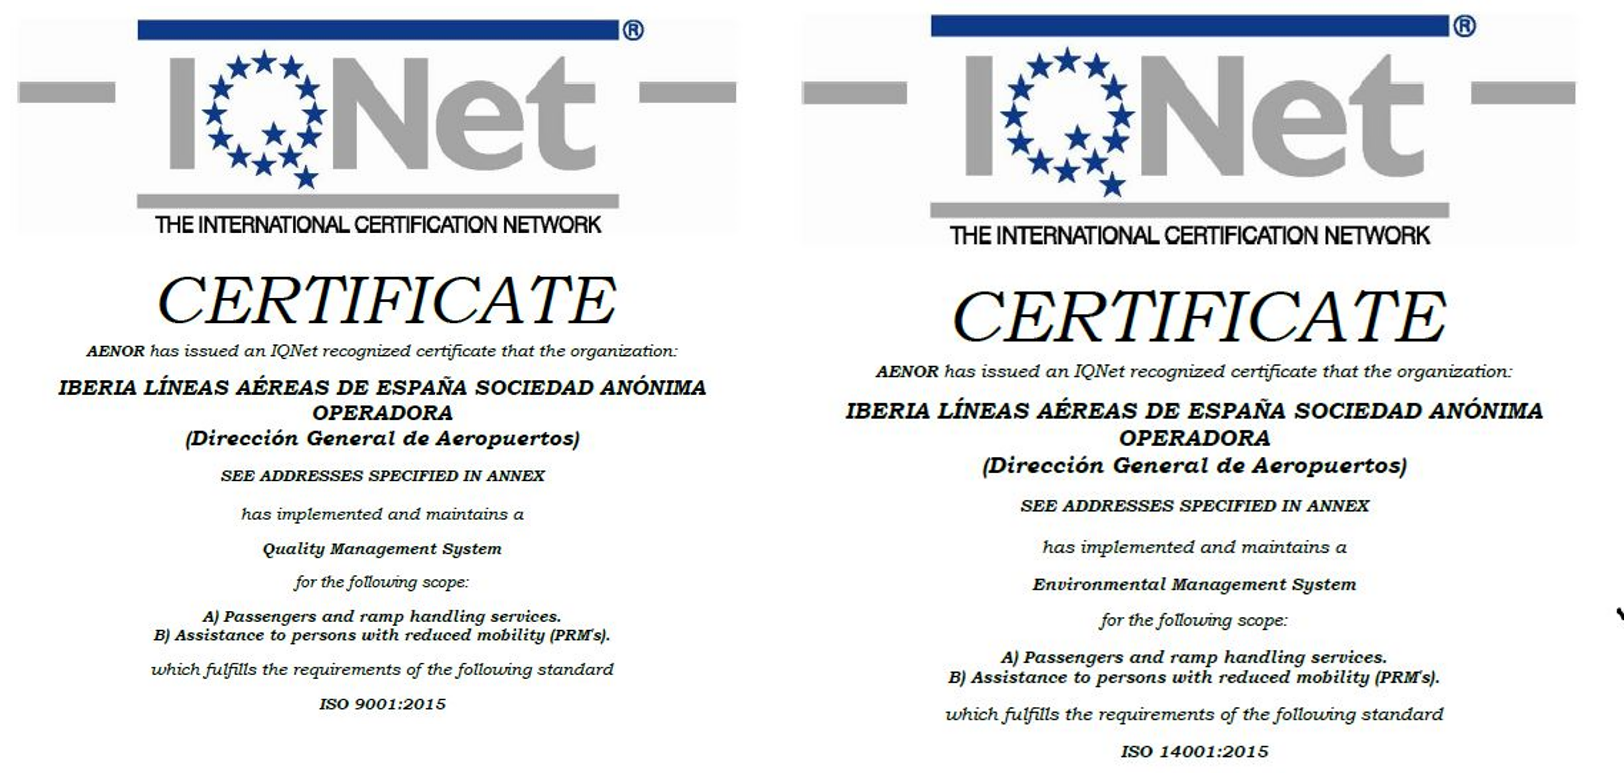 Renewal of ISO 9001 and ISO 14001 Certificates